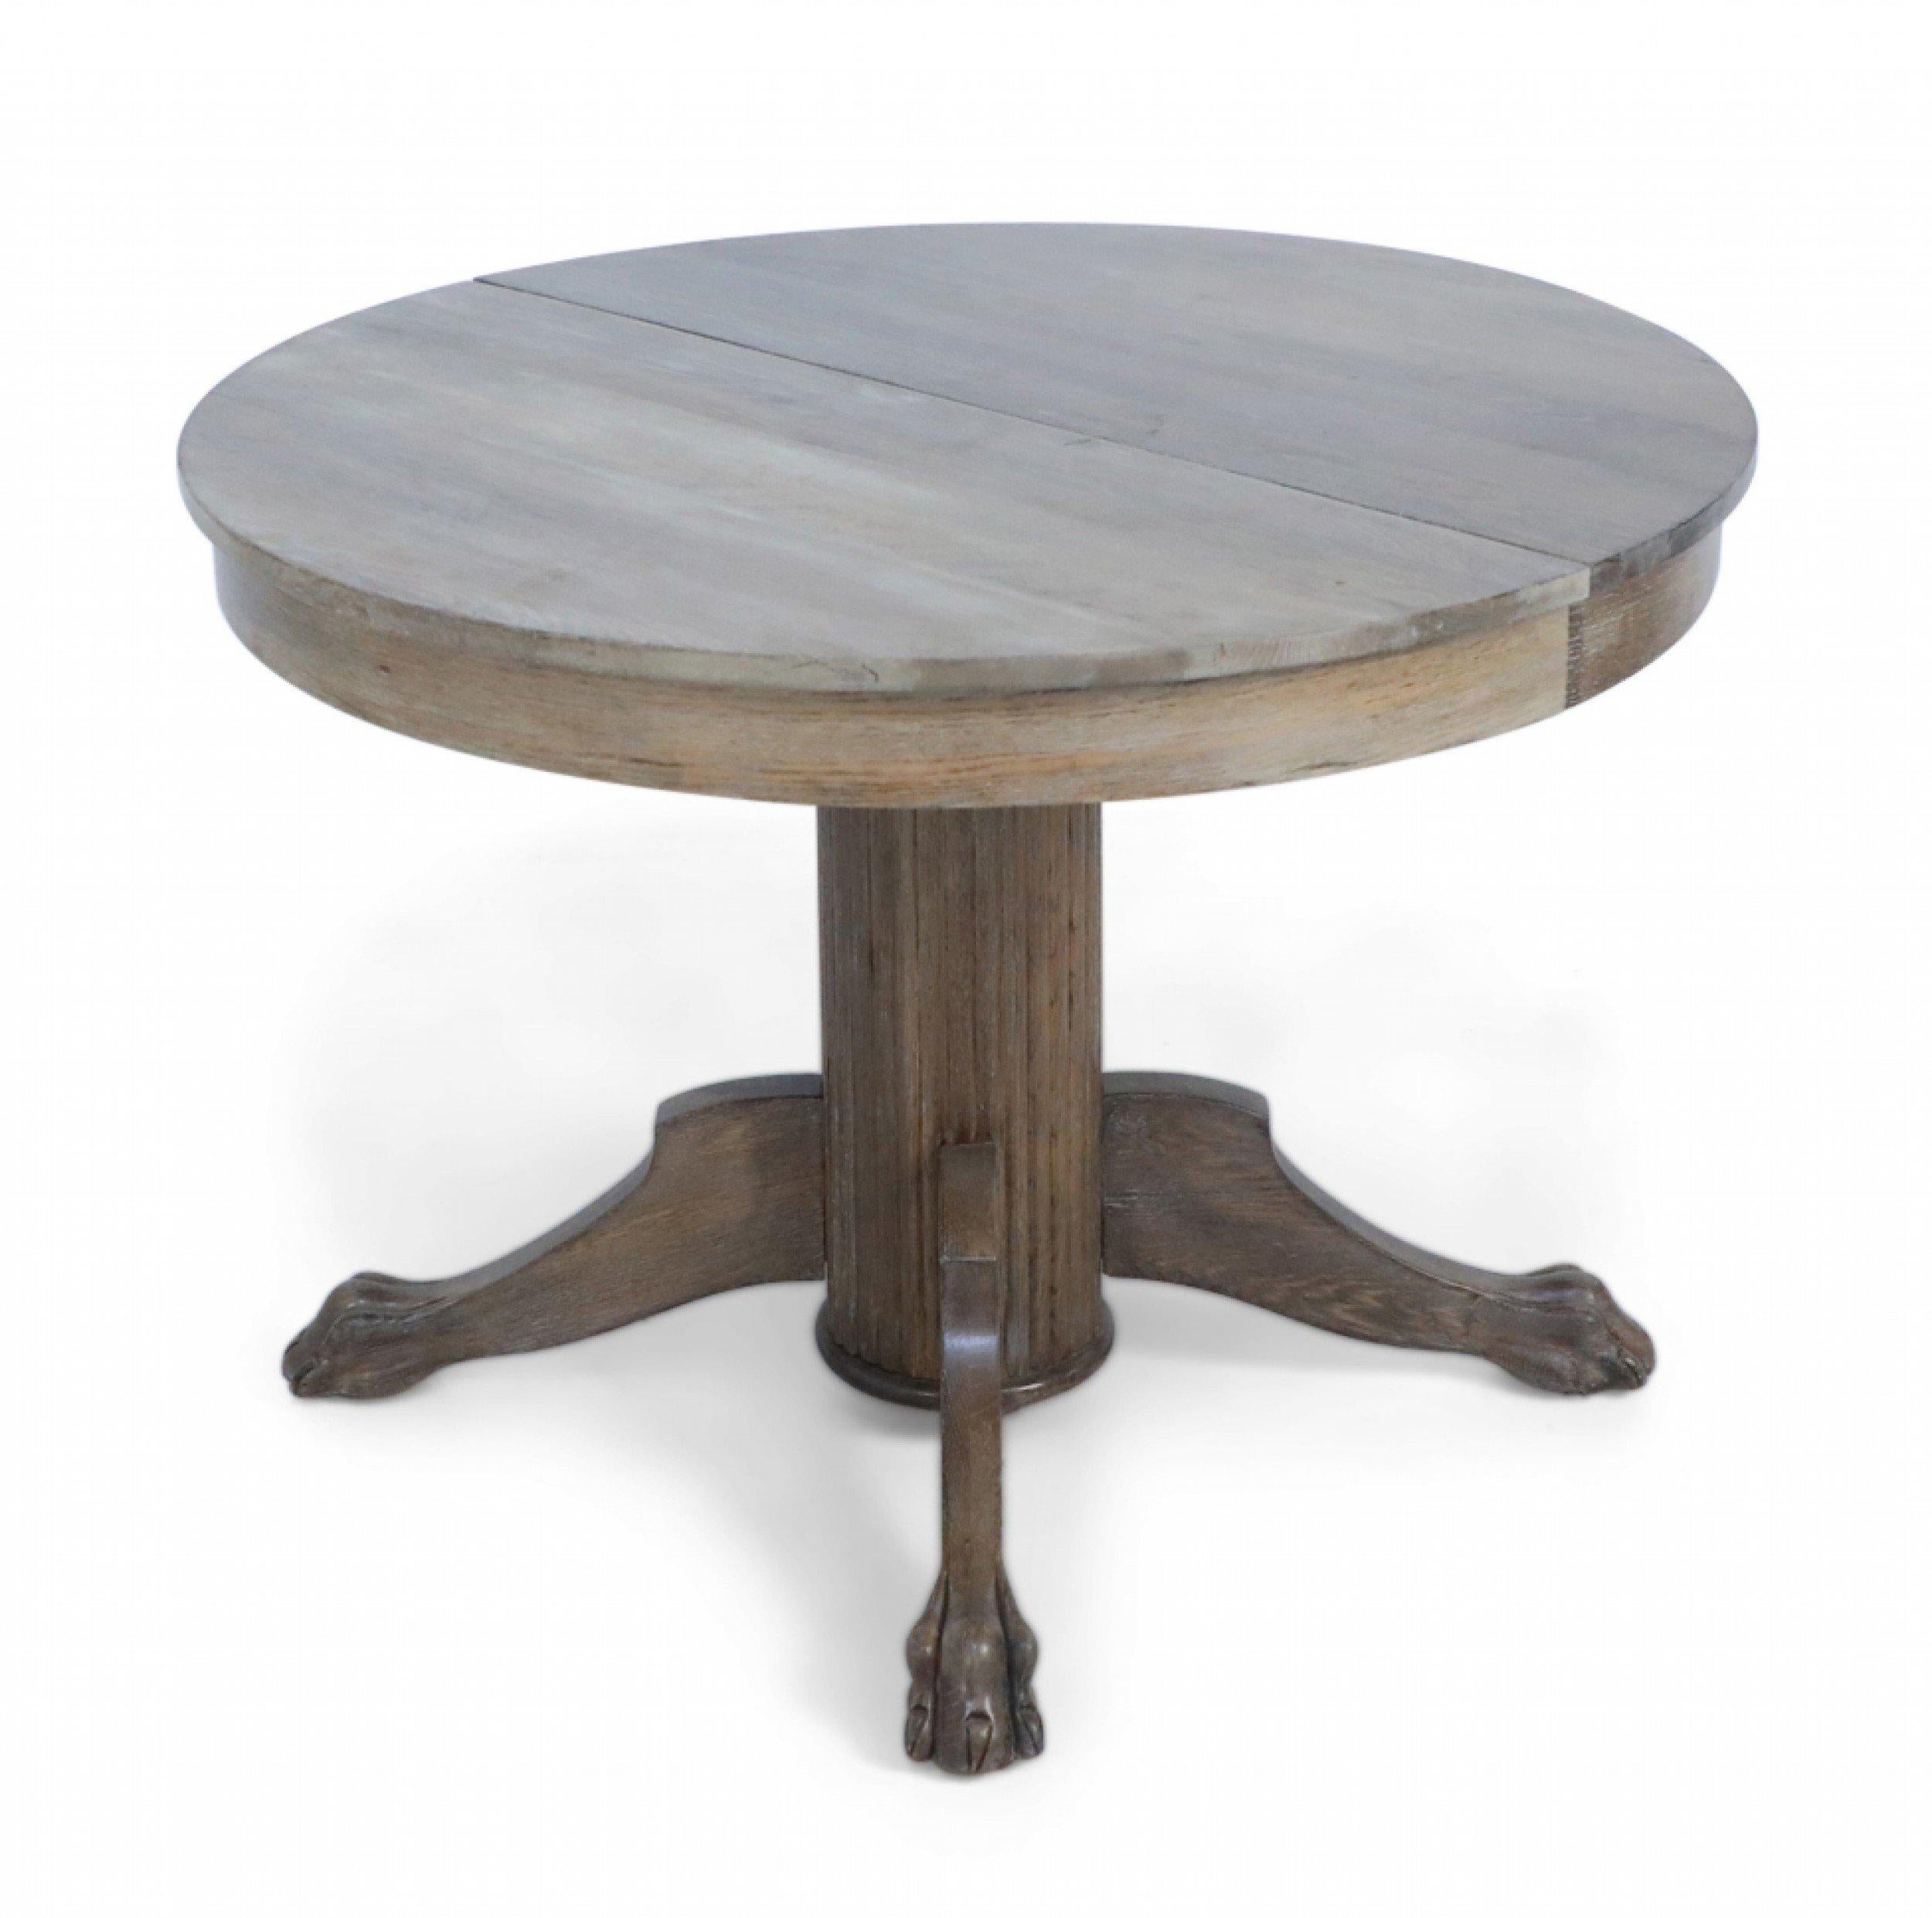 English Edwardian Cerused Oak Circular Claw Foot Center/Dining Table with Leaves For Sale 1